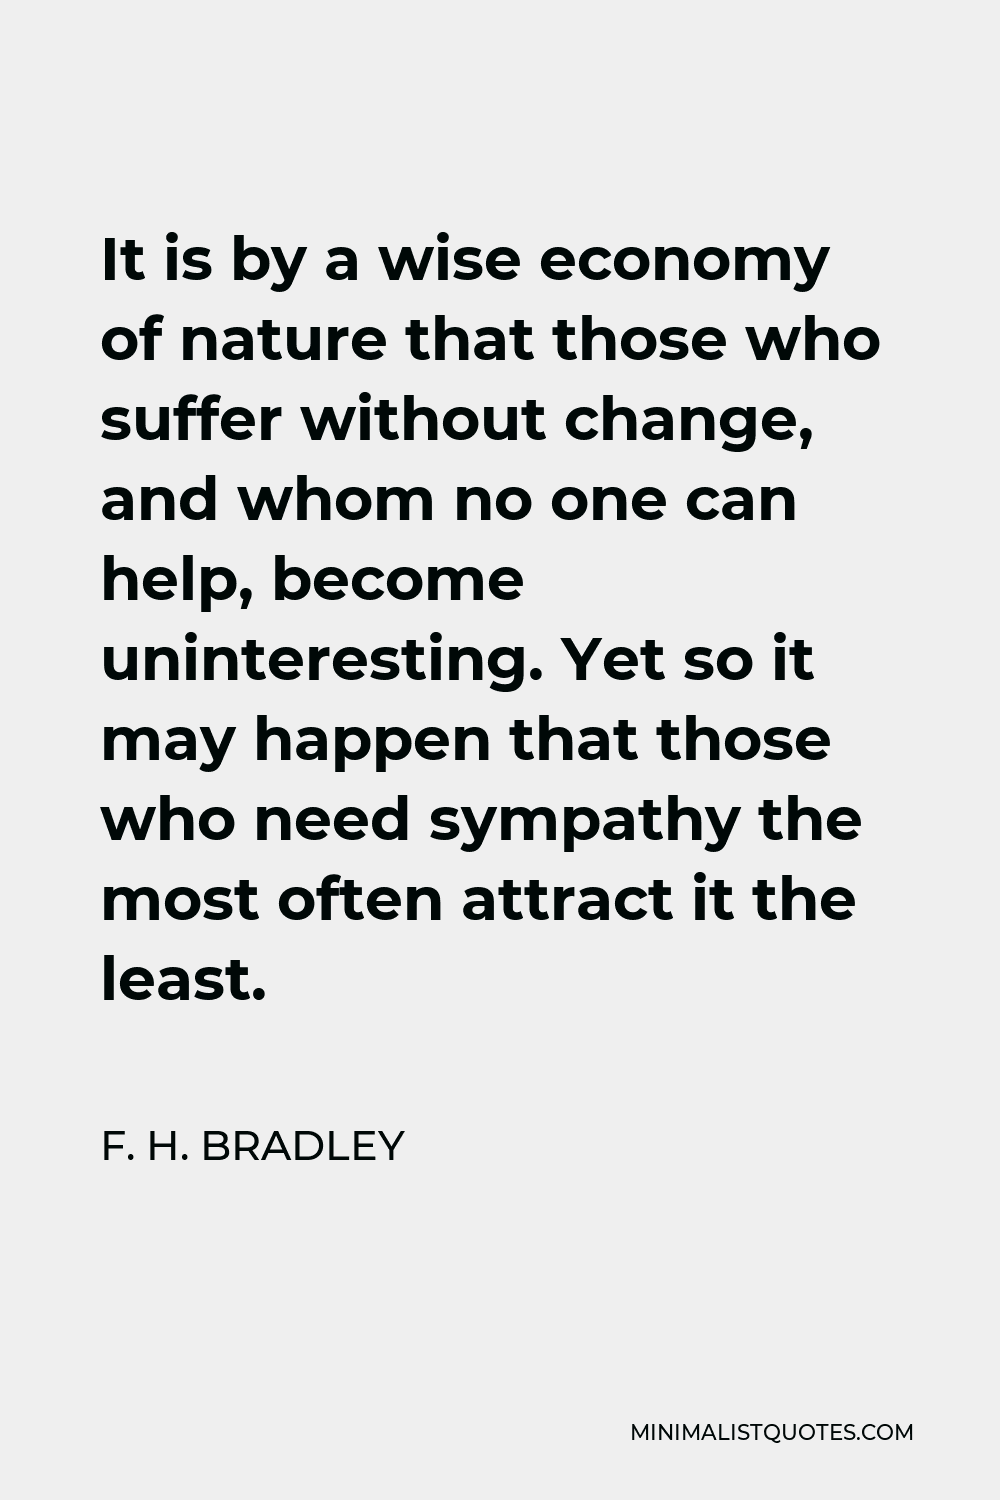 F. H. Bradley Quote - It is by a wise economy of nature that those who suffer without change, and whom no one can help, become uninteresting. Yet so it may happen that those who need sympathy the most often attract it the least.